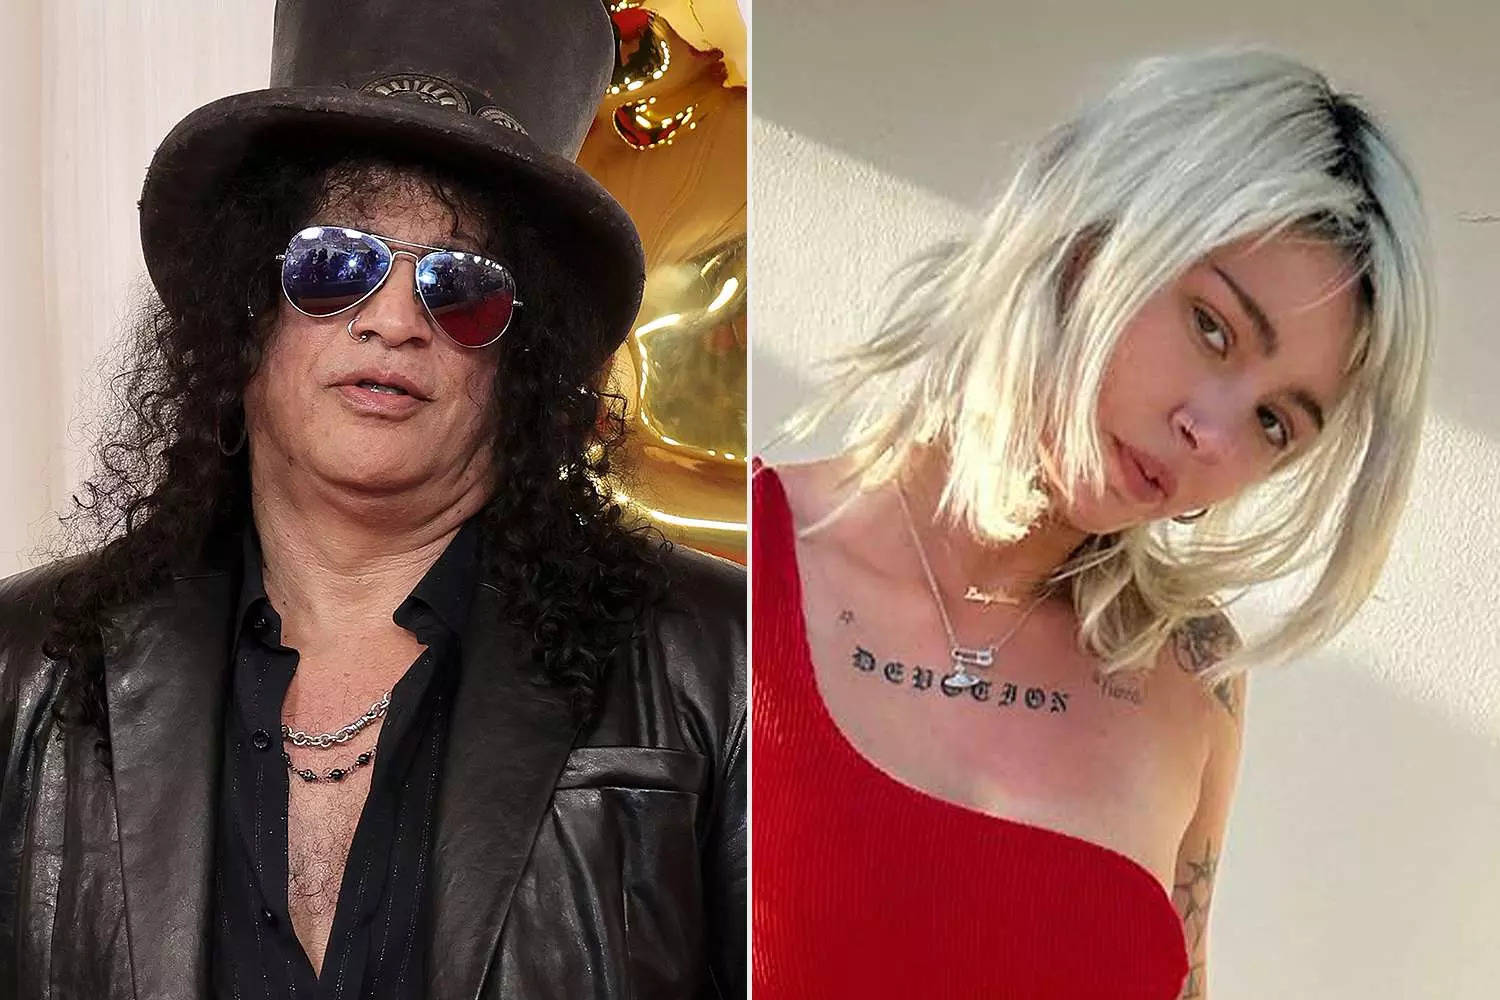 Rock legend Slash mourns the tragic passing of beloved step daughter Lucy-Bleu Knight, aged 25 